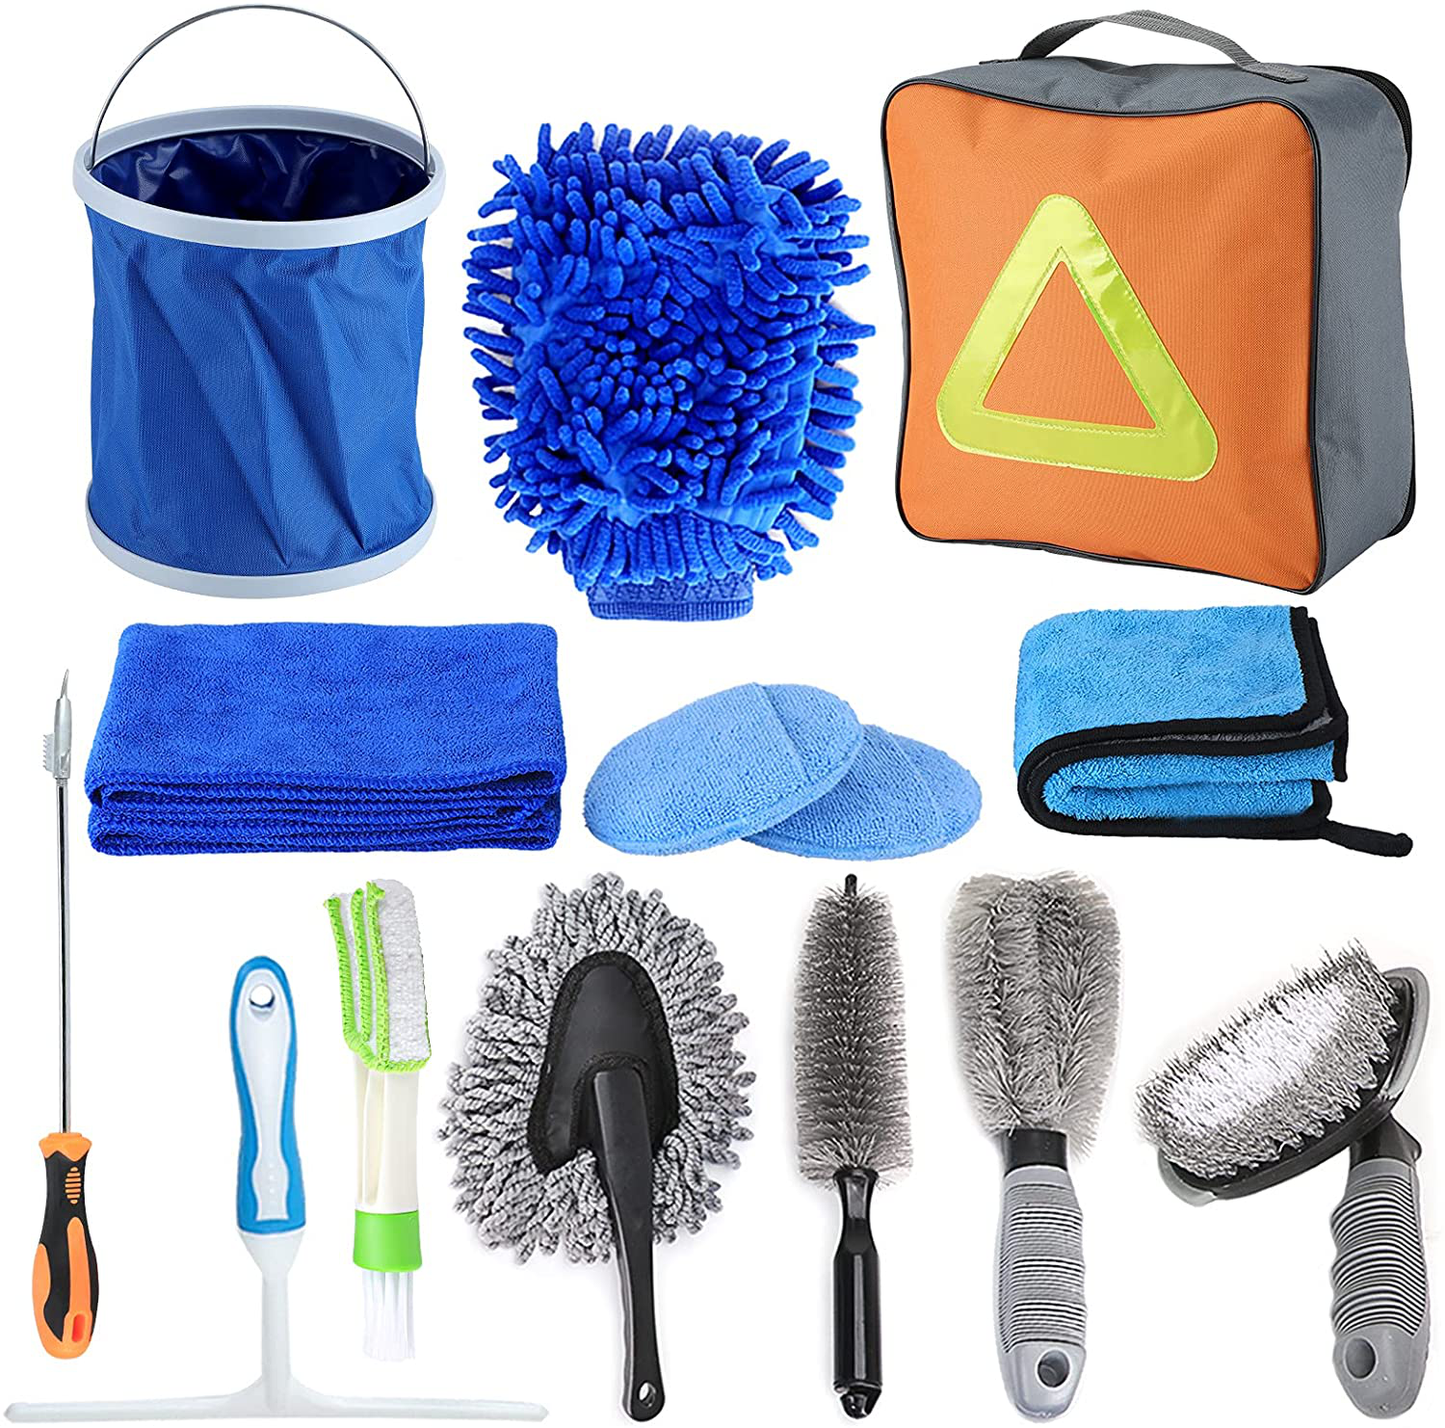 YOMIKI Car Wash Kit, Car Cleaning Tools Set Car Detailing Kit with Collapsible Bucket Wash Mitt Drying Towels Tire Brush Window Scraper Duster for Exterior Car Washing and Car Interior Cleaning